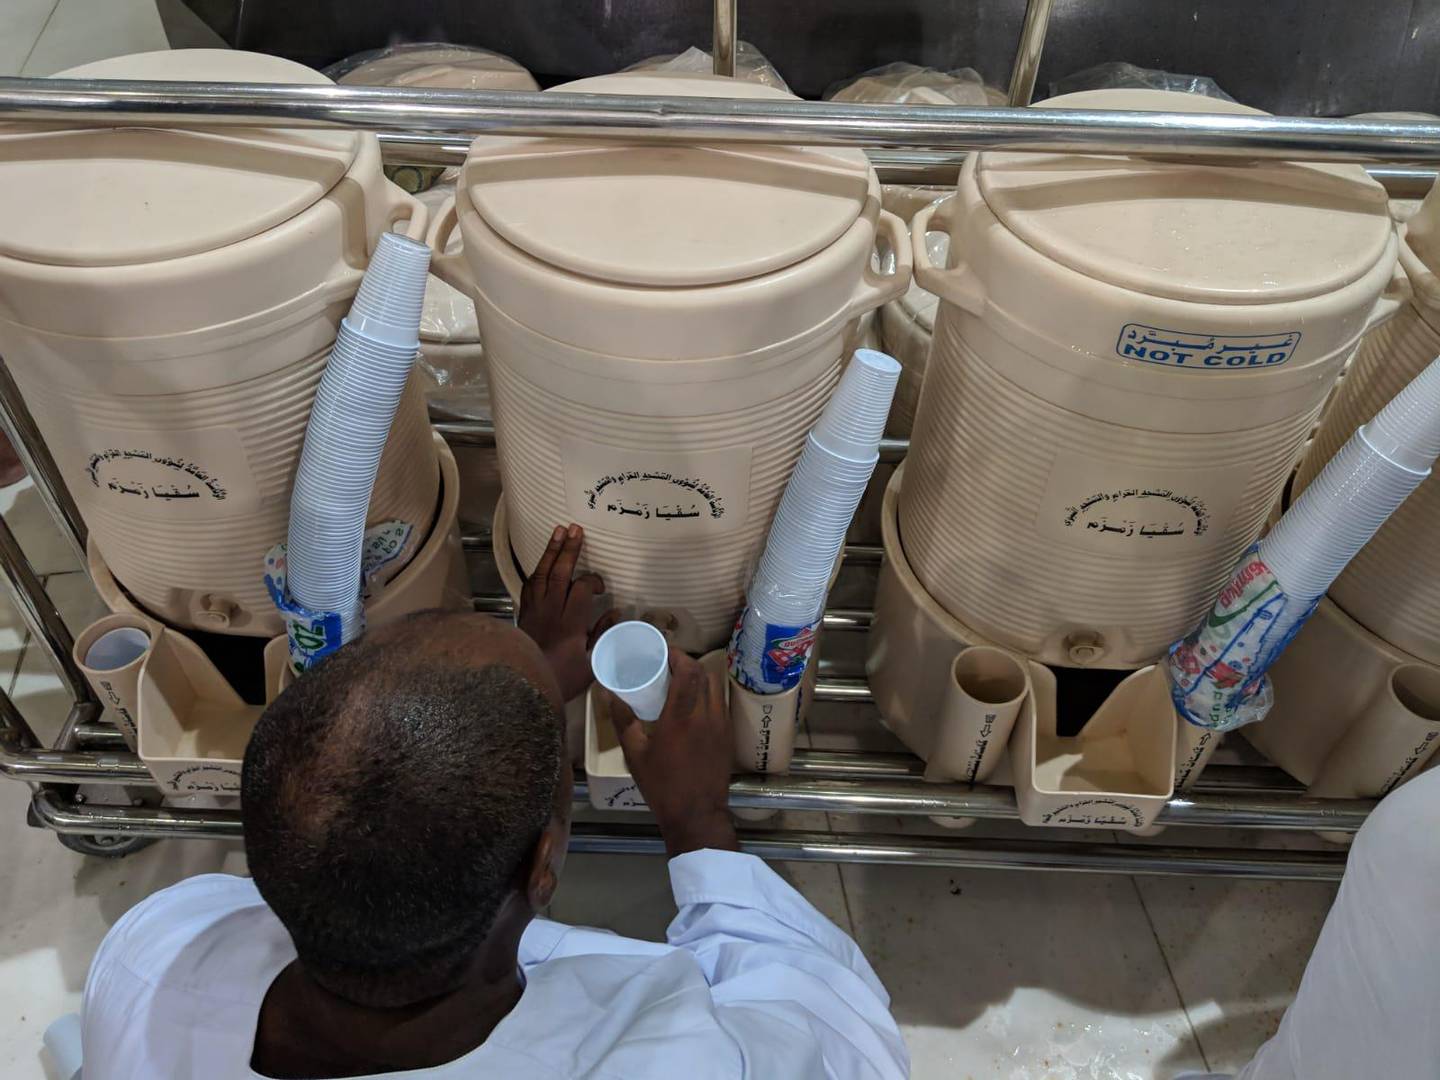 Containers of zamzam water are distributed across the mosque